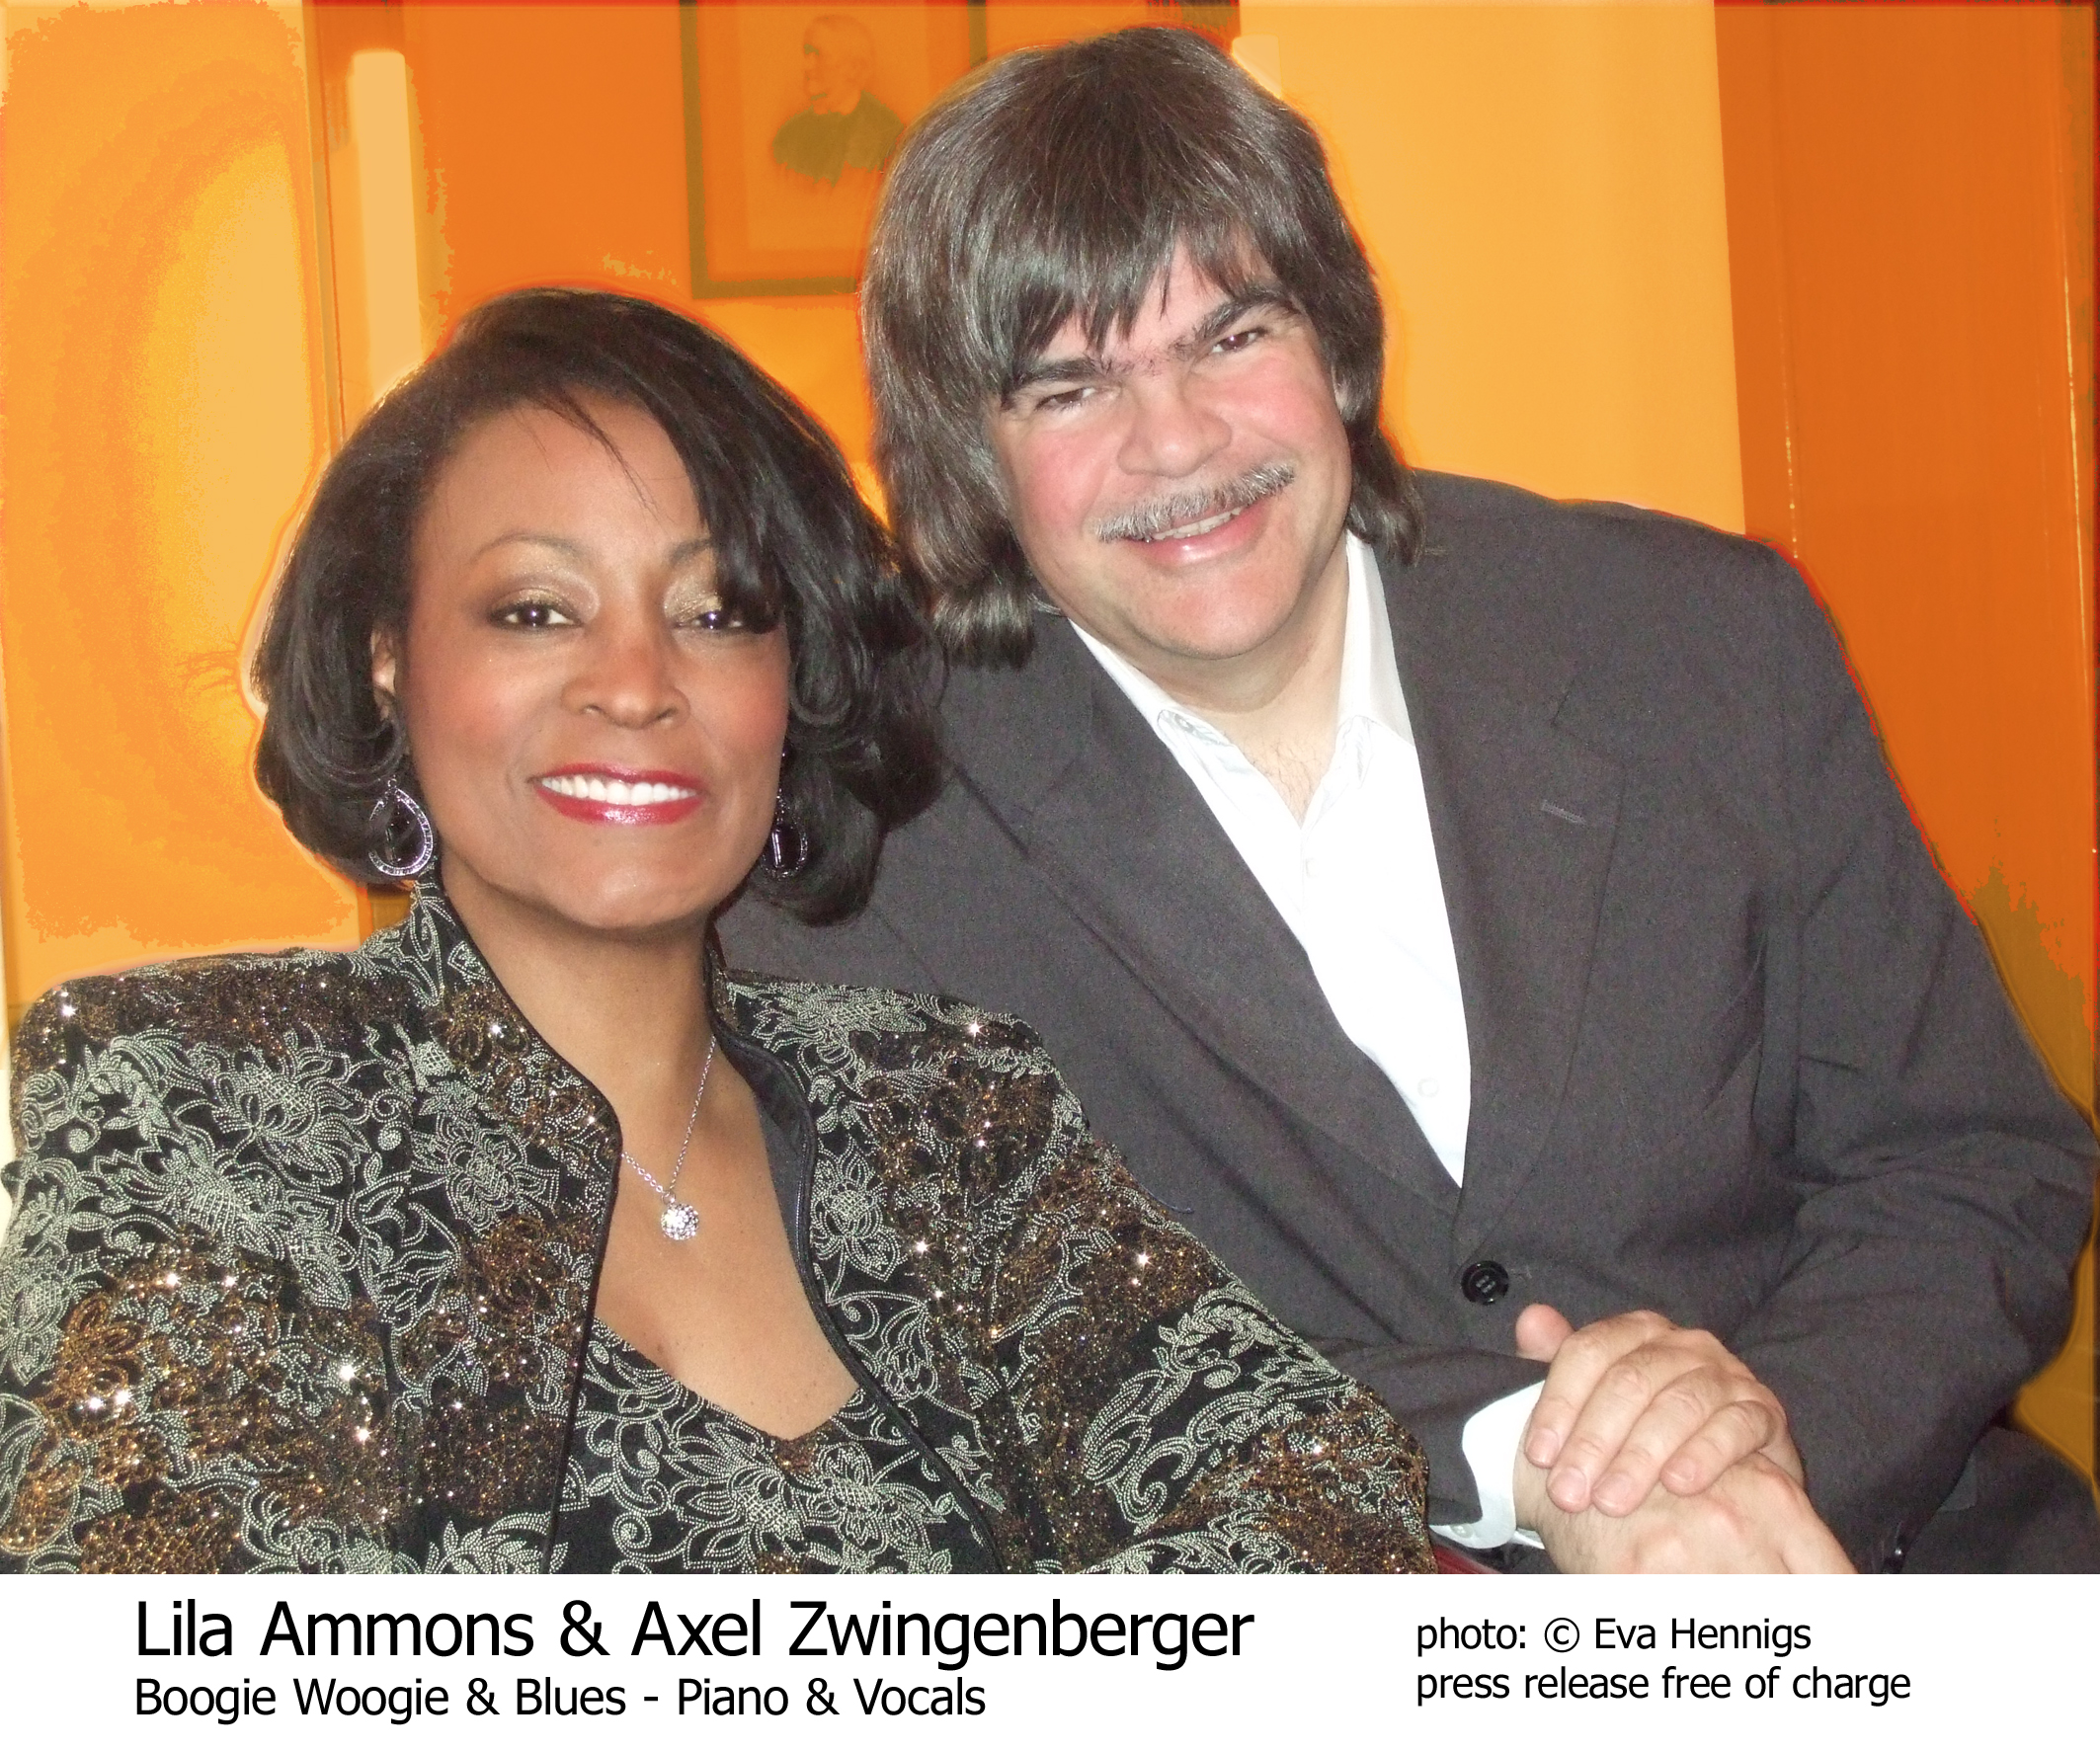 Axel Zwingenberger - meets Lila Ammons